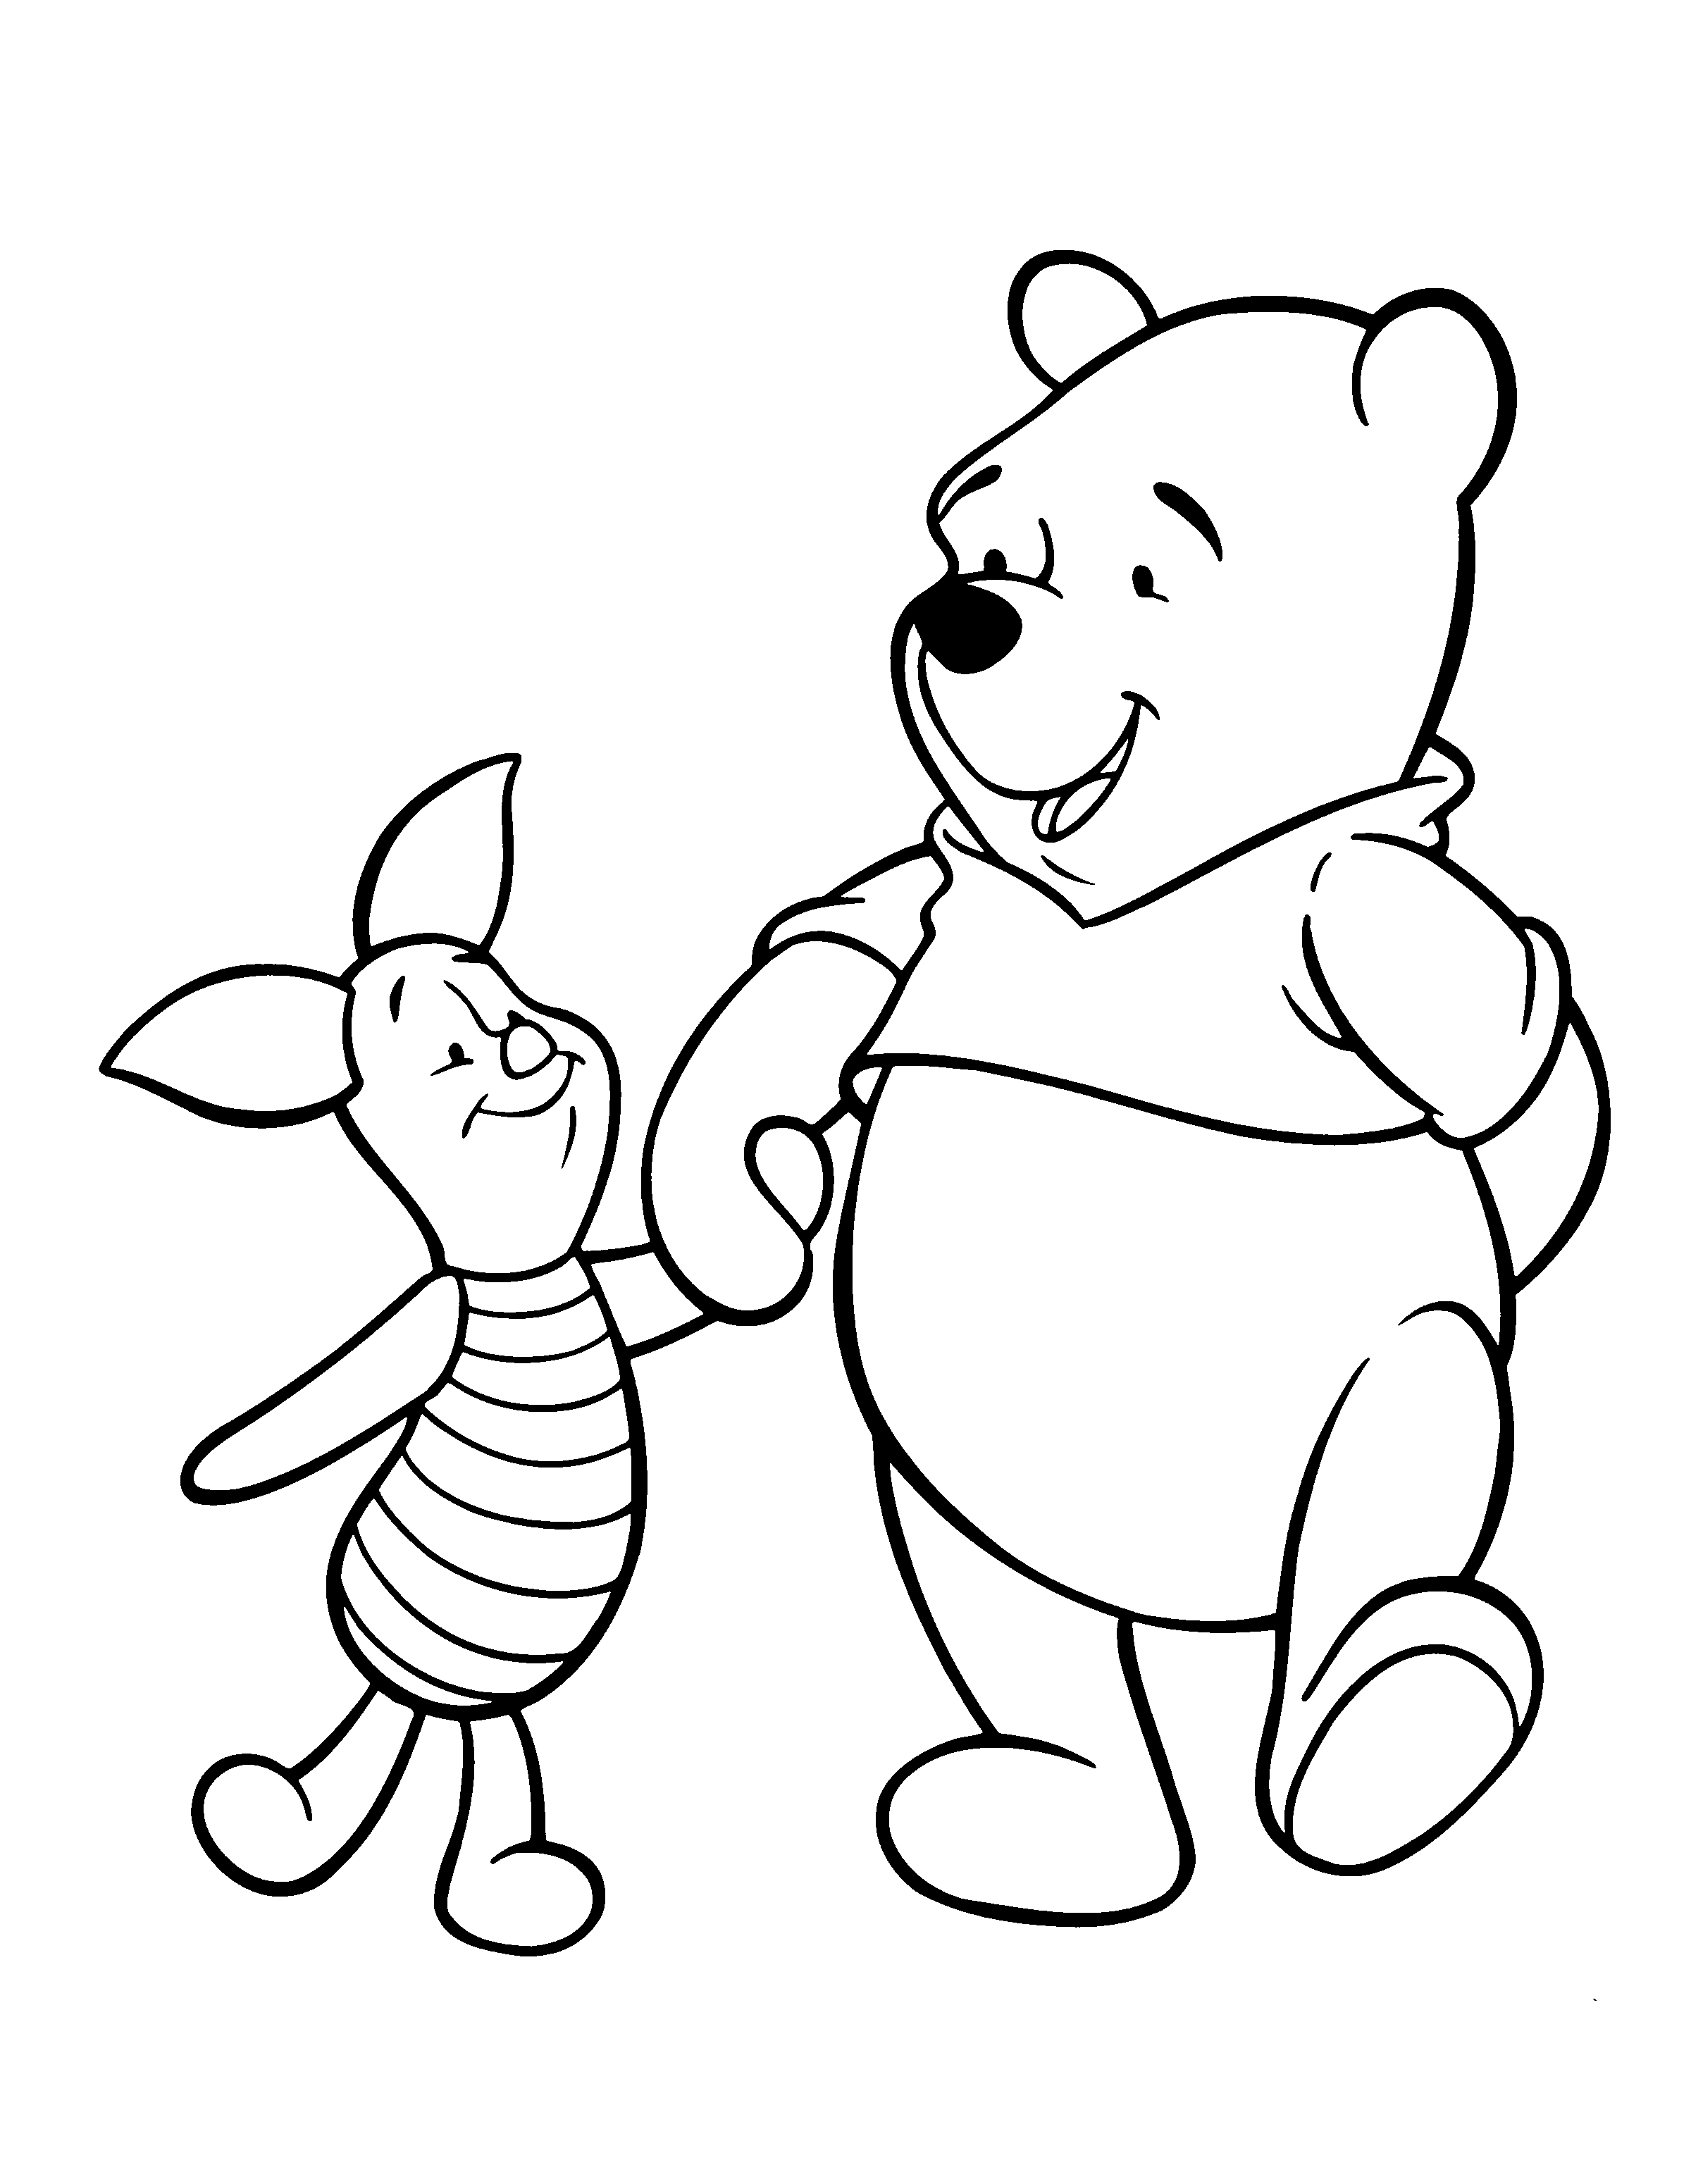 winnie-the-pooh-printable-coloring-pages